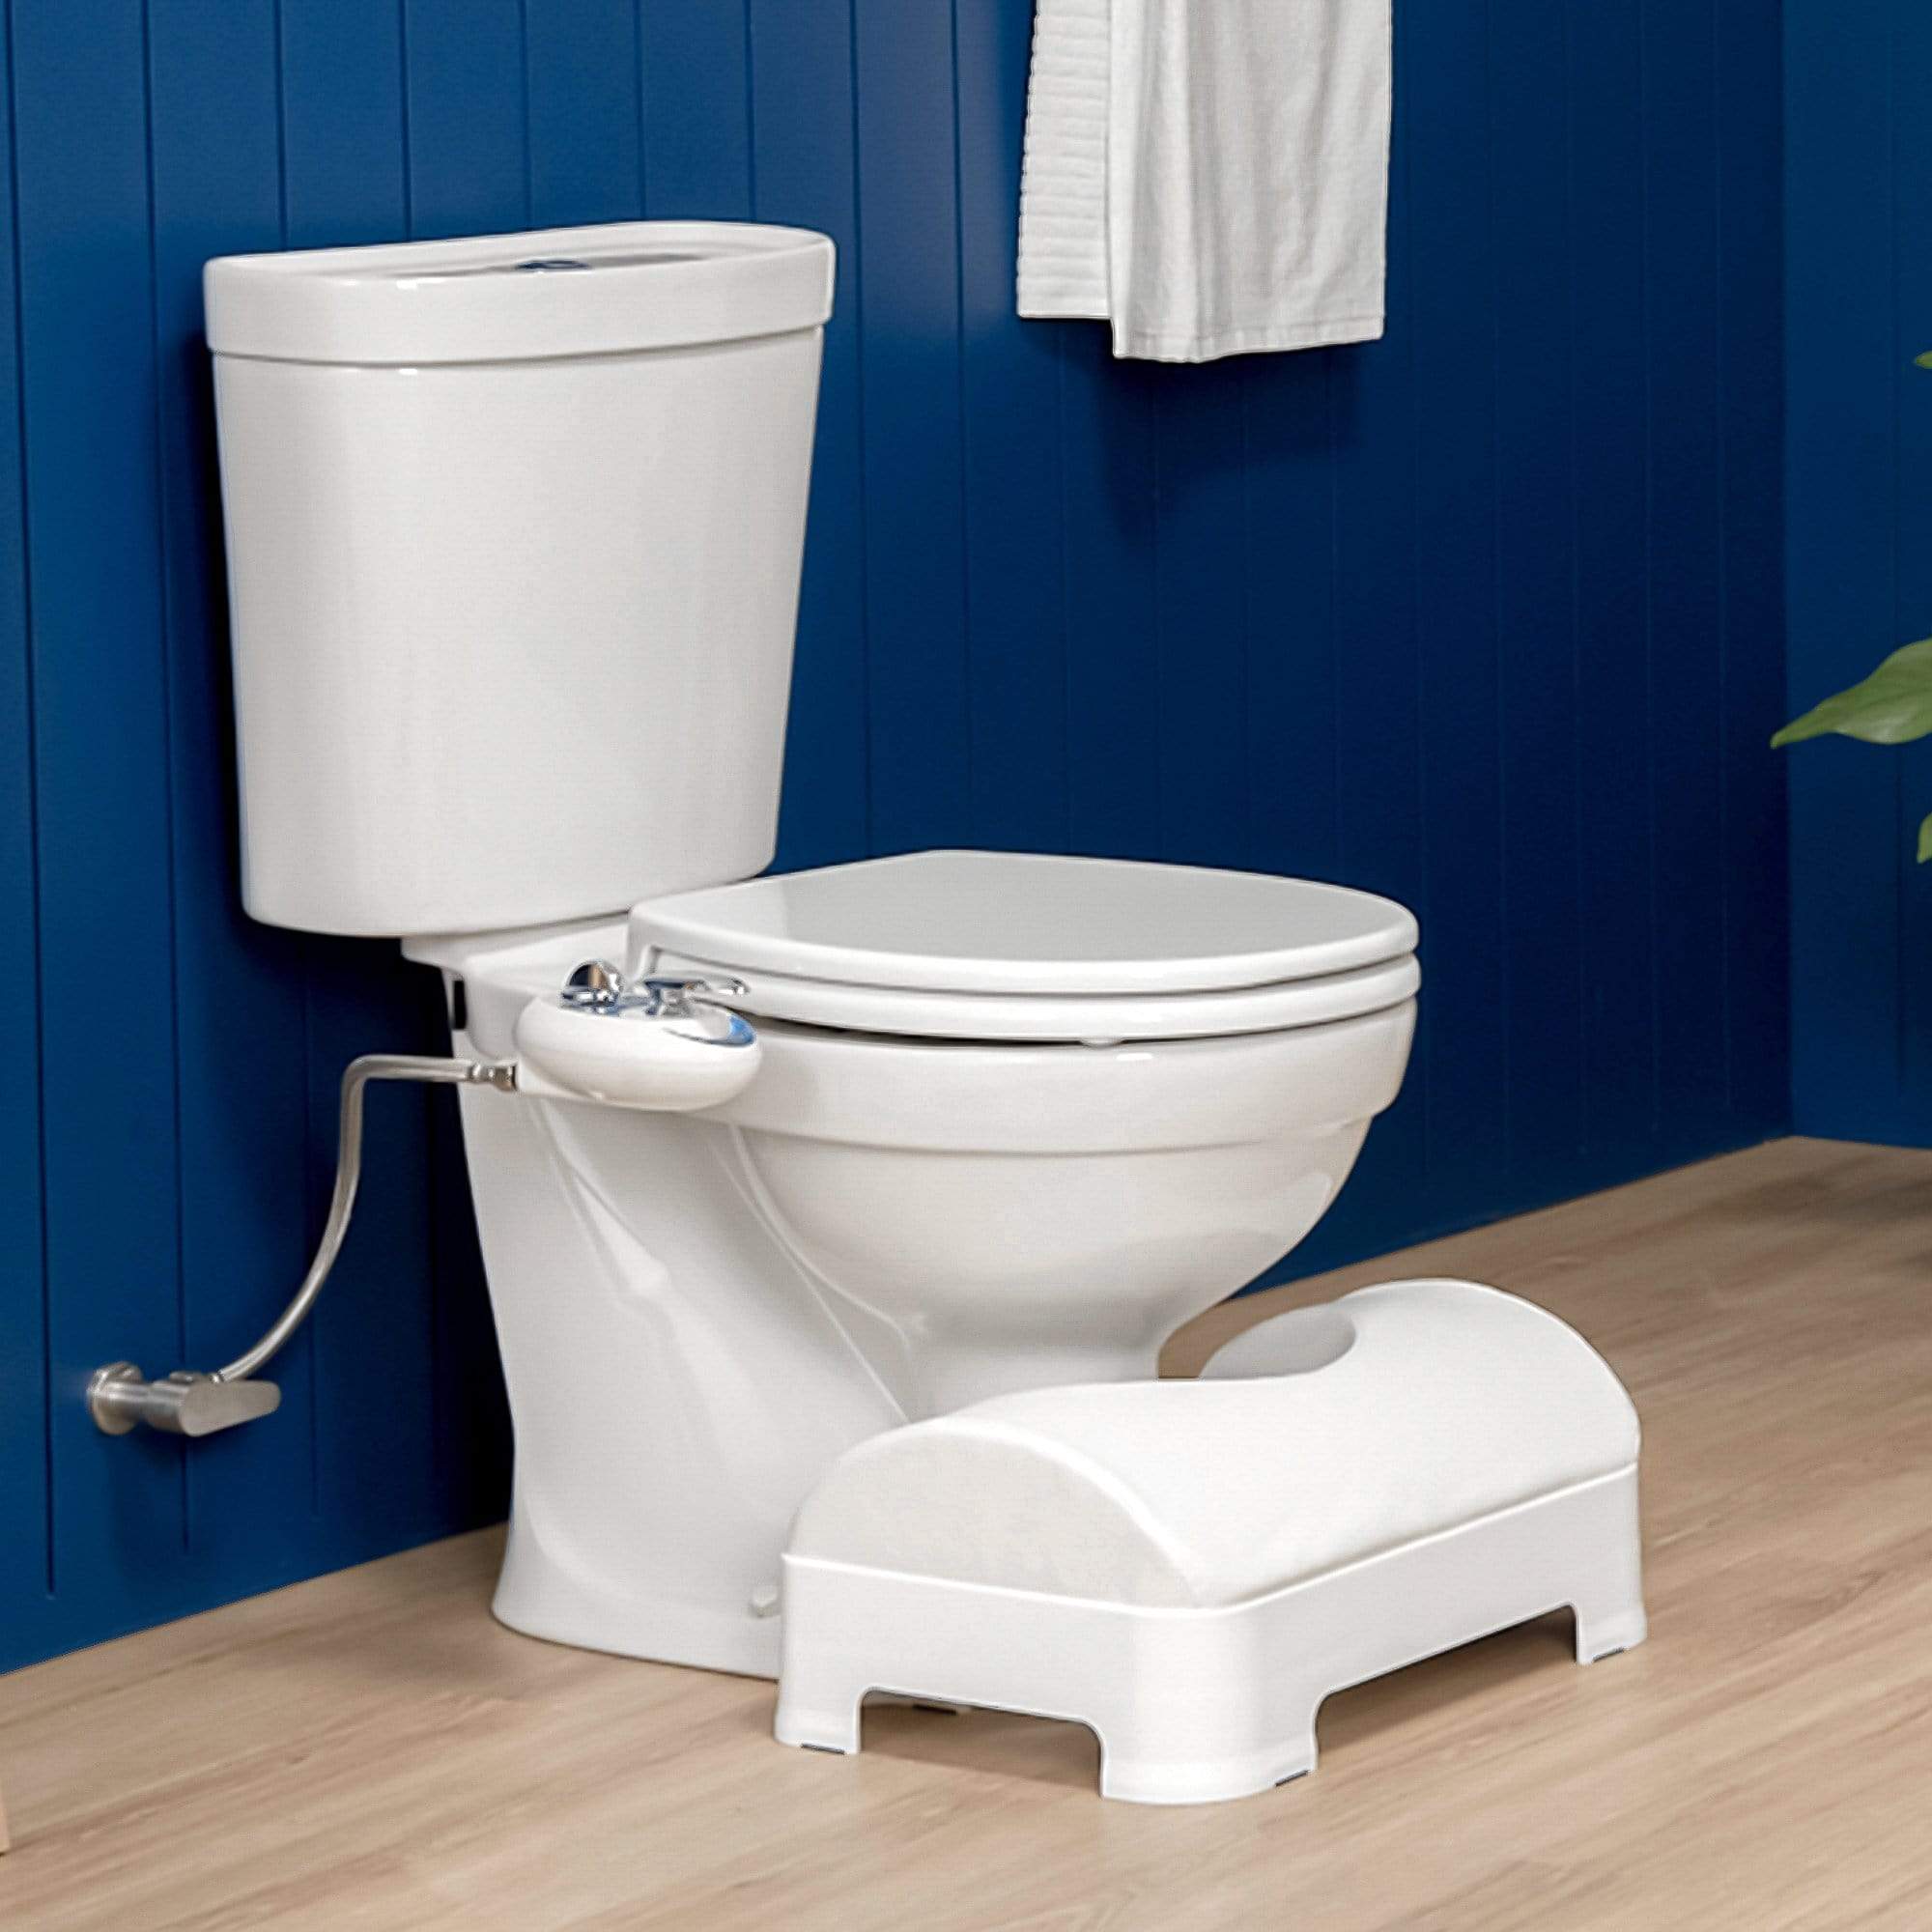 LUXE Footstool in front of a toilet with a NEO bidet installed, in wooden and blue bathroom